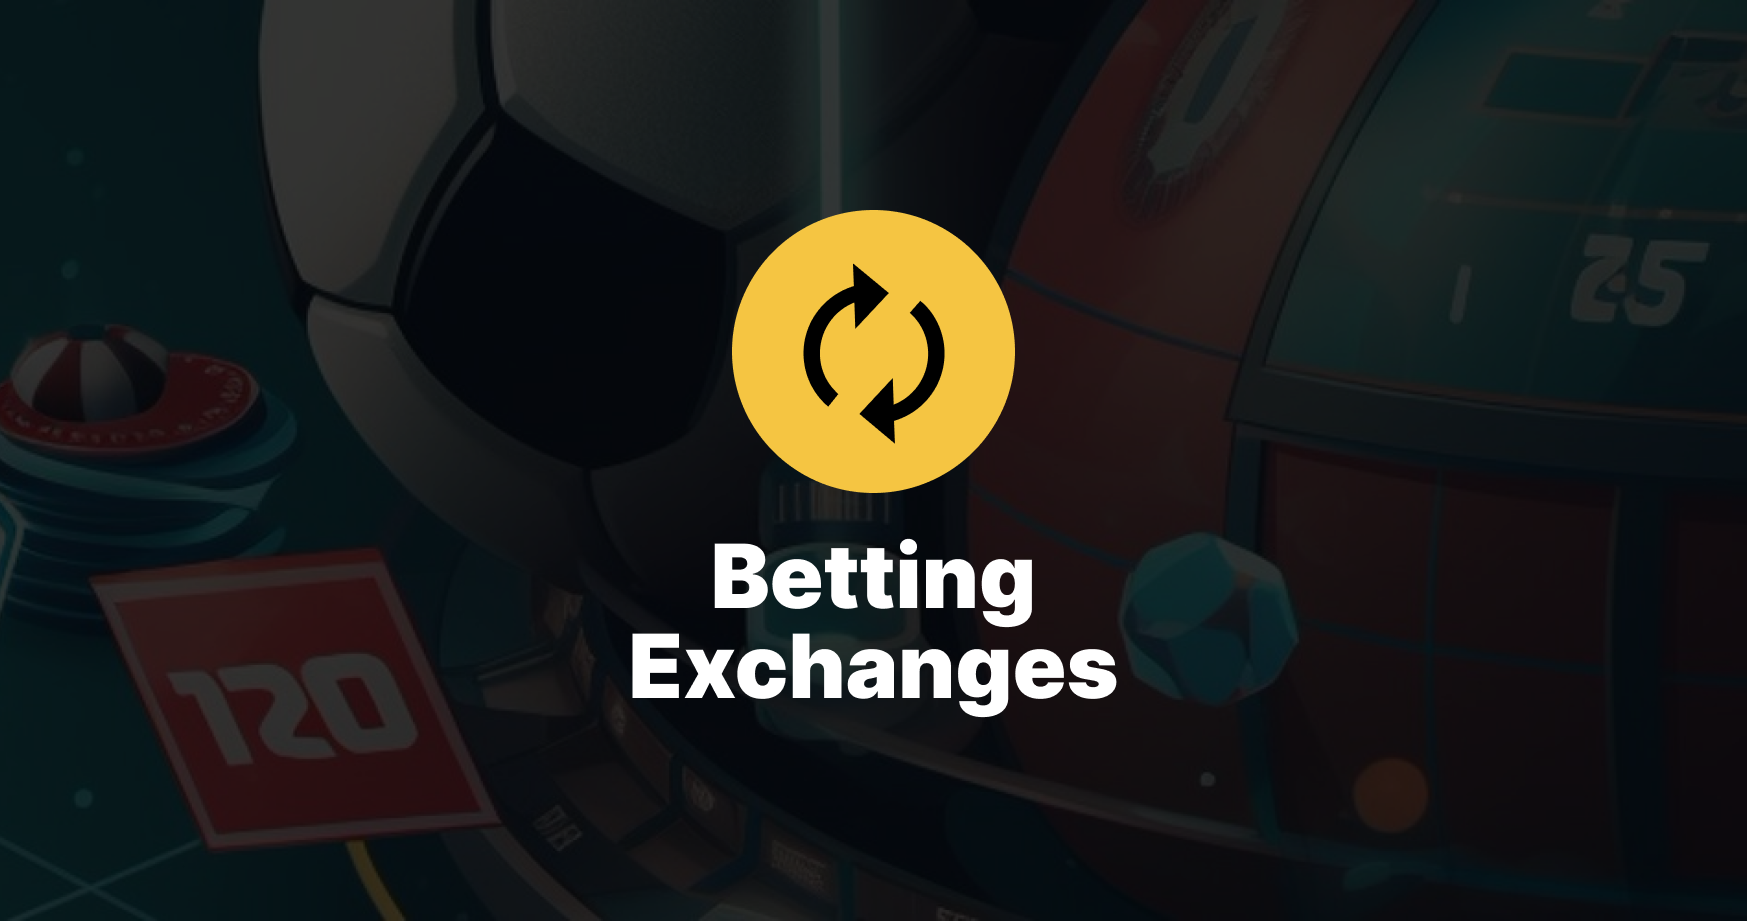 An image illustrating the concept of a betting exchange, represented by two arrows pointing towards each other, symbolizing the back and lay betting system of peer-to-peer wagering.